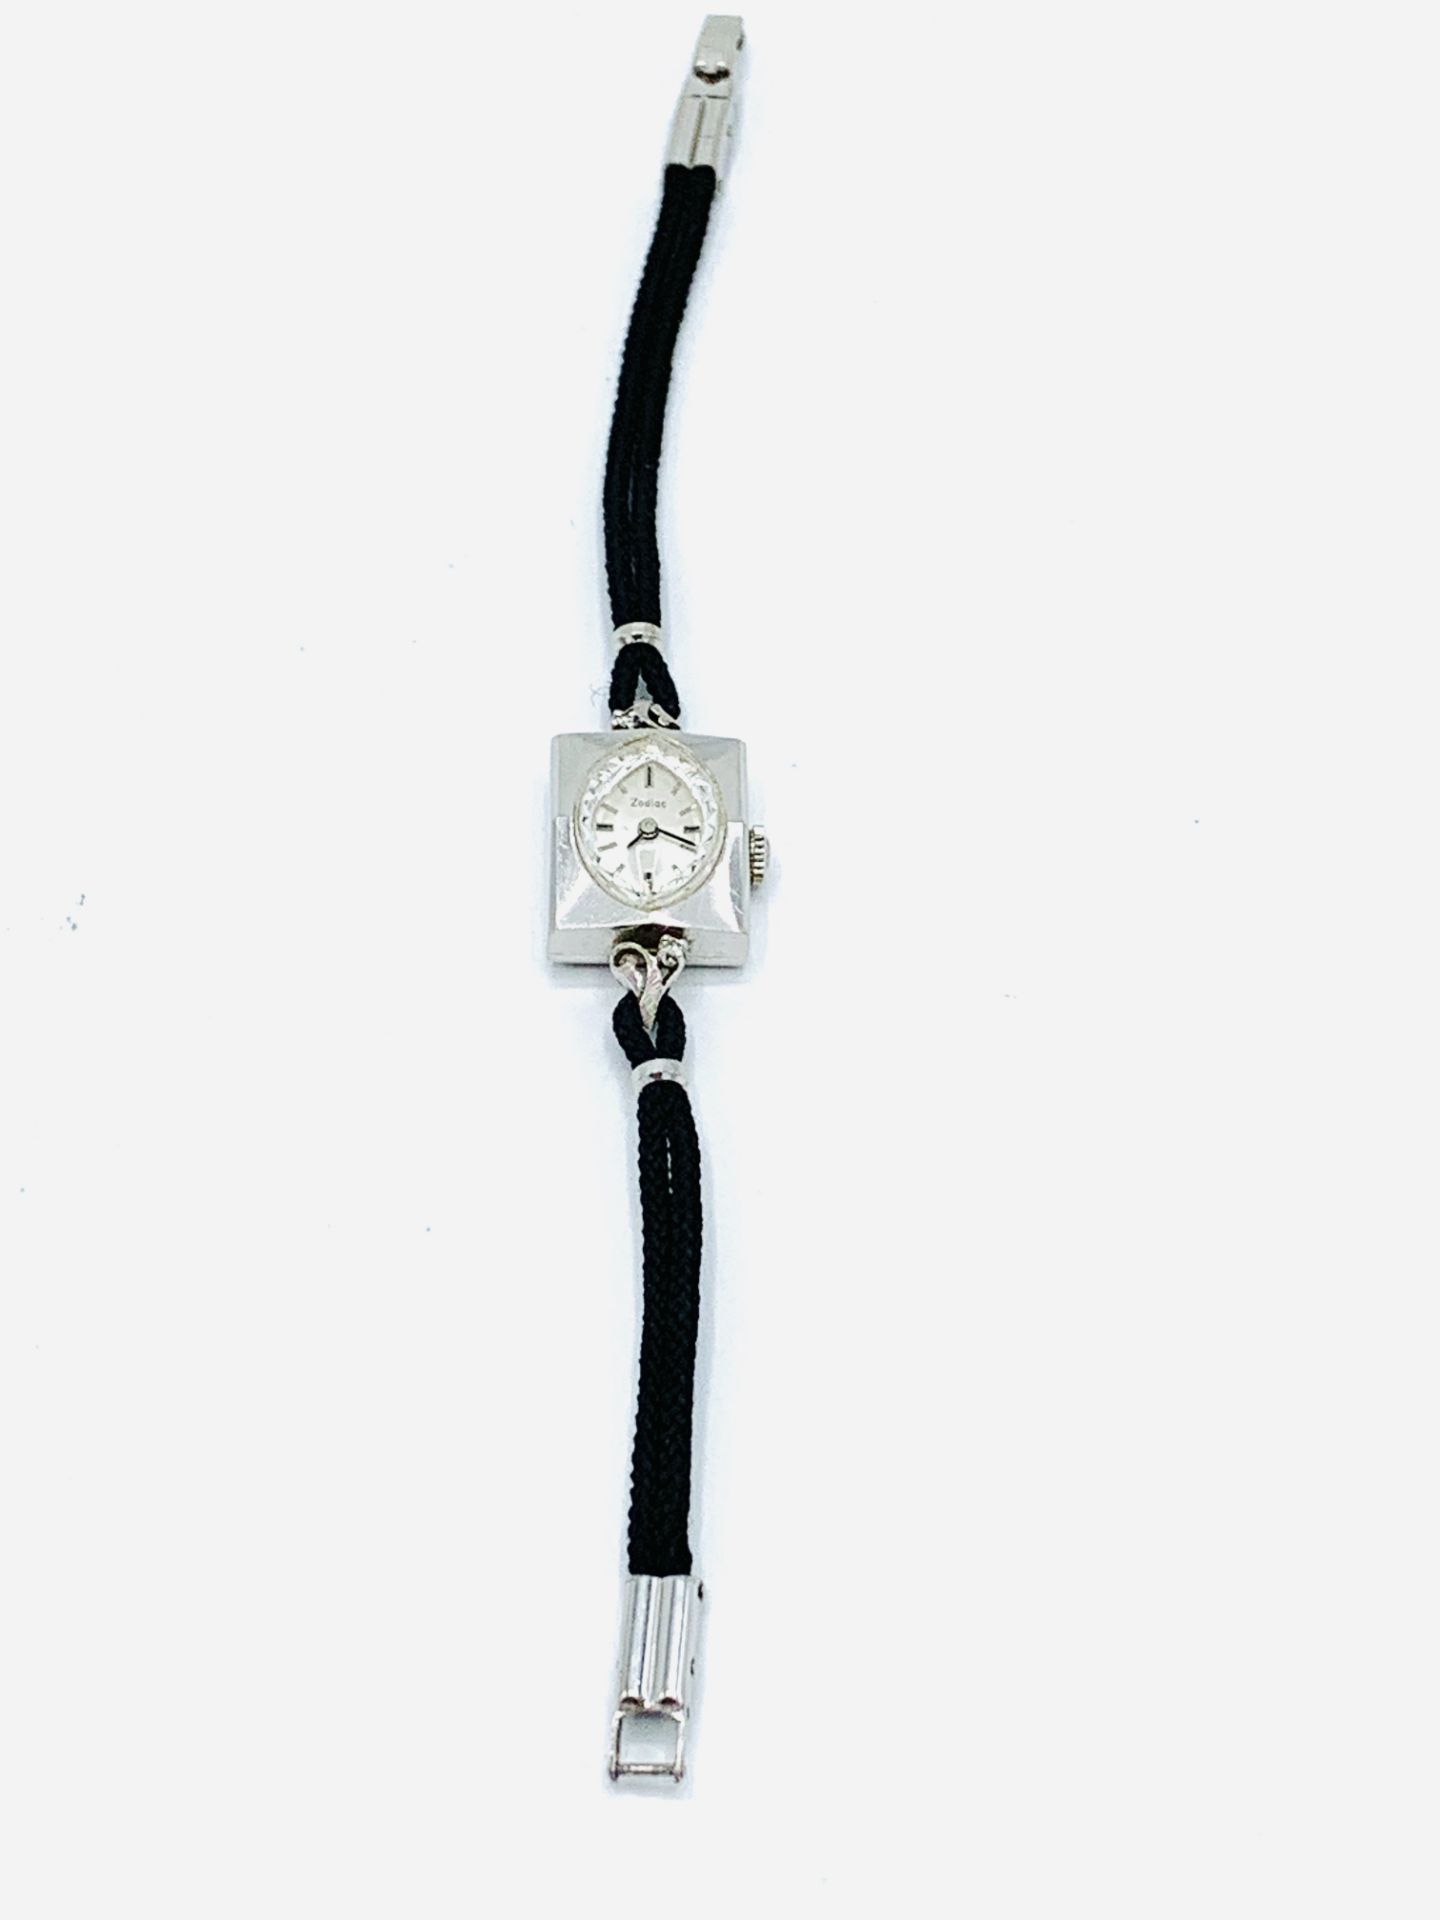 14k white gold cased Zodiac cocktail watch. - Image 2 of 3